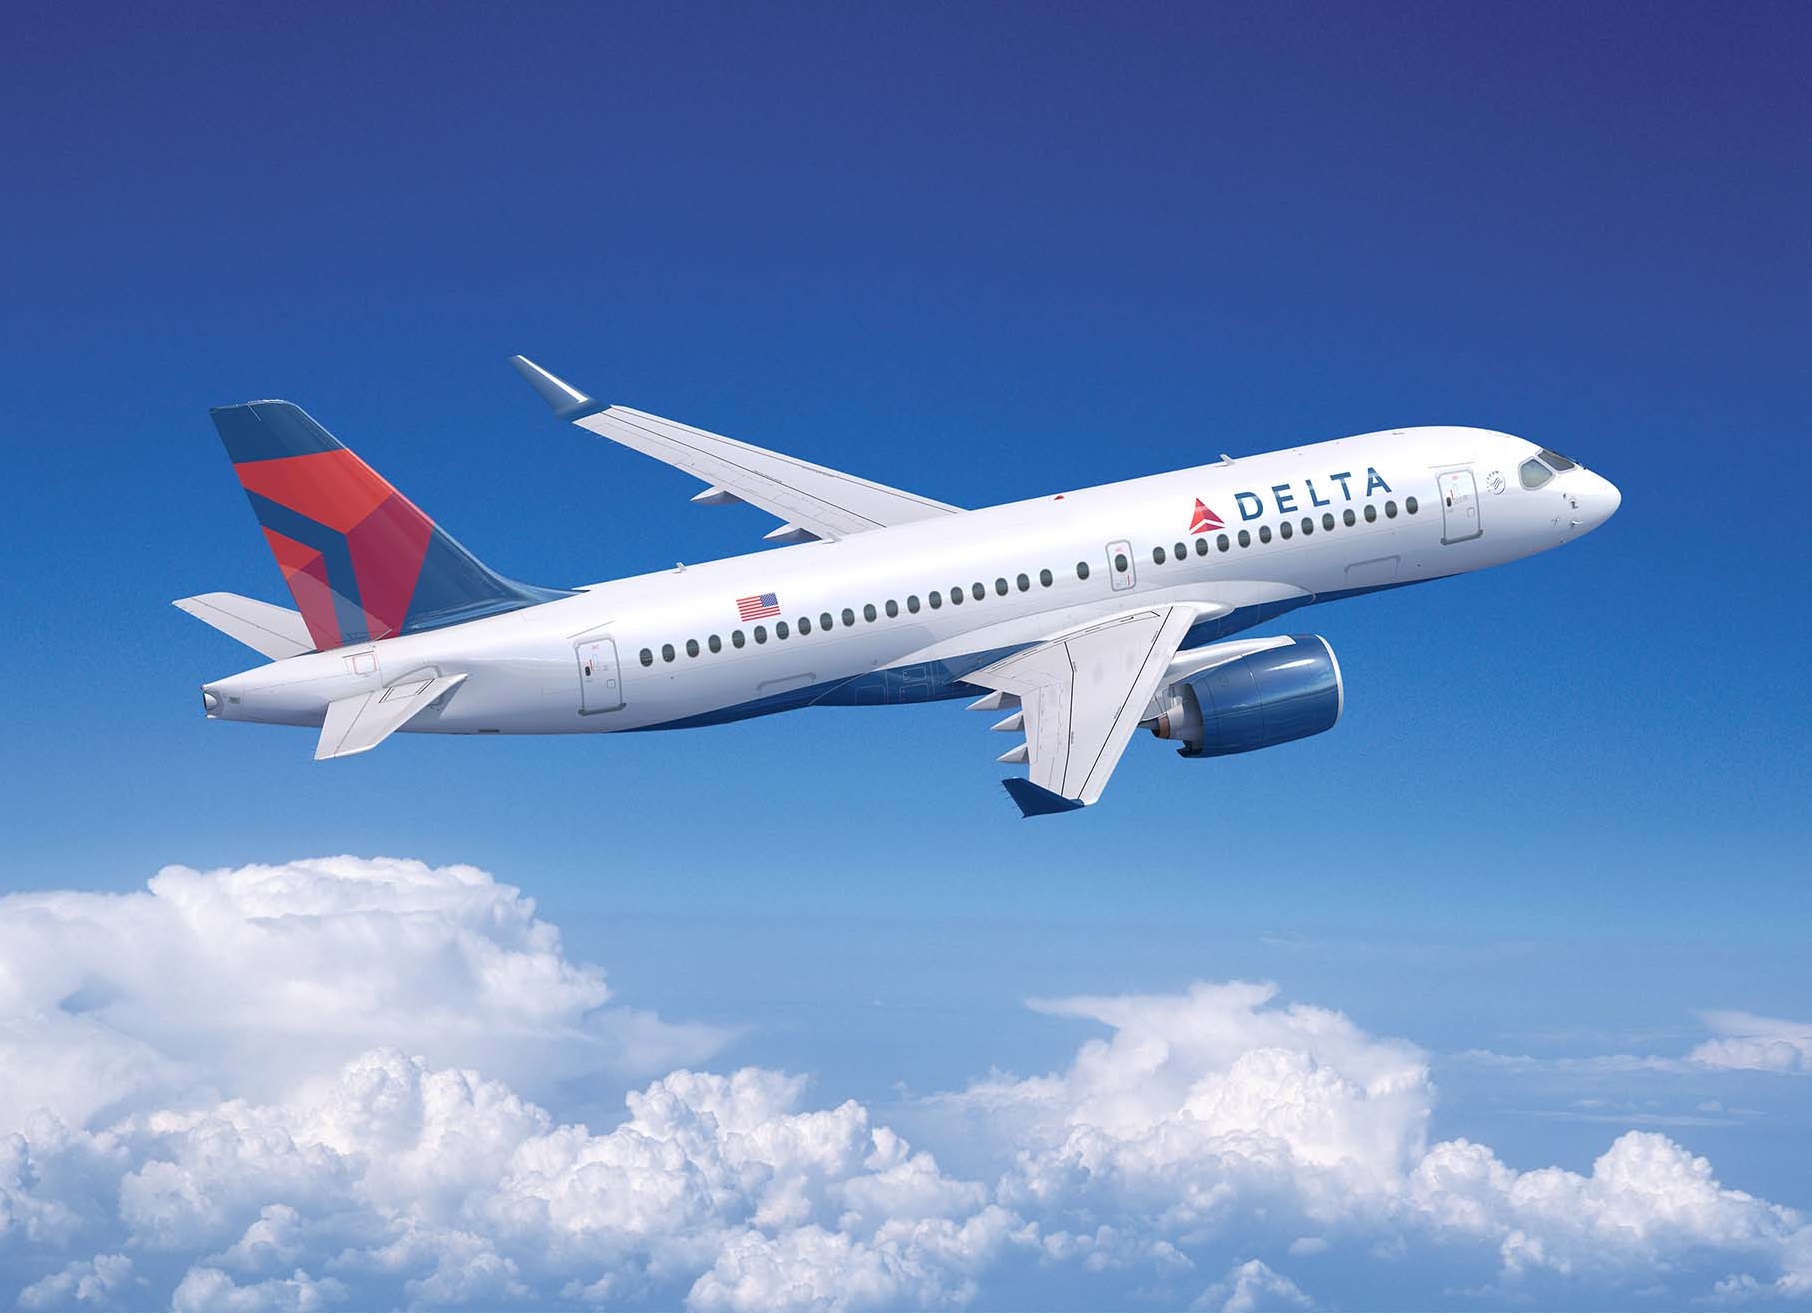 Delta Airlines / Fly Deal Fare Blog Travel With Ease / Find the latest